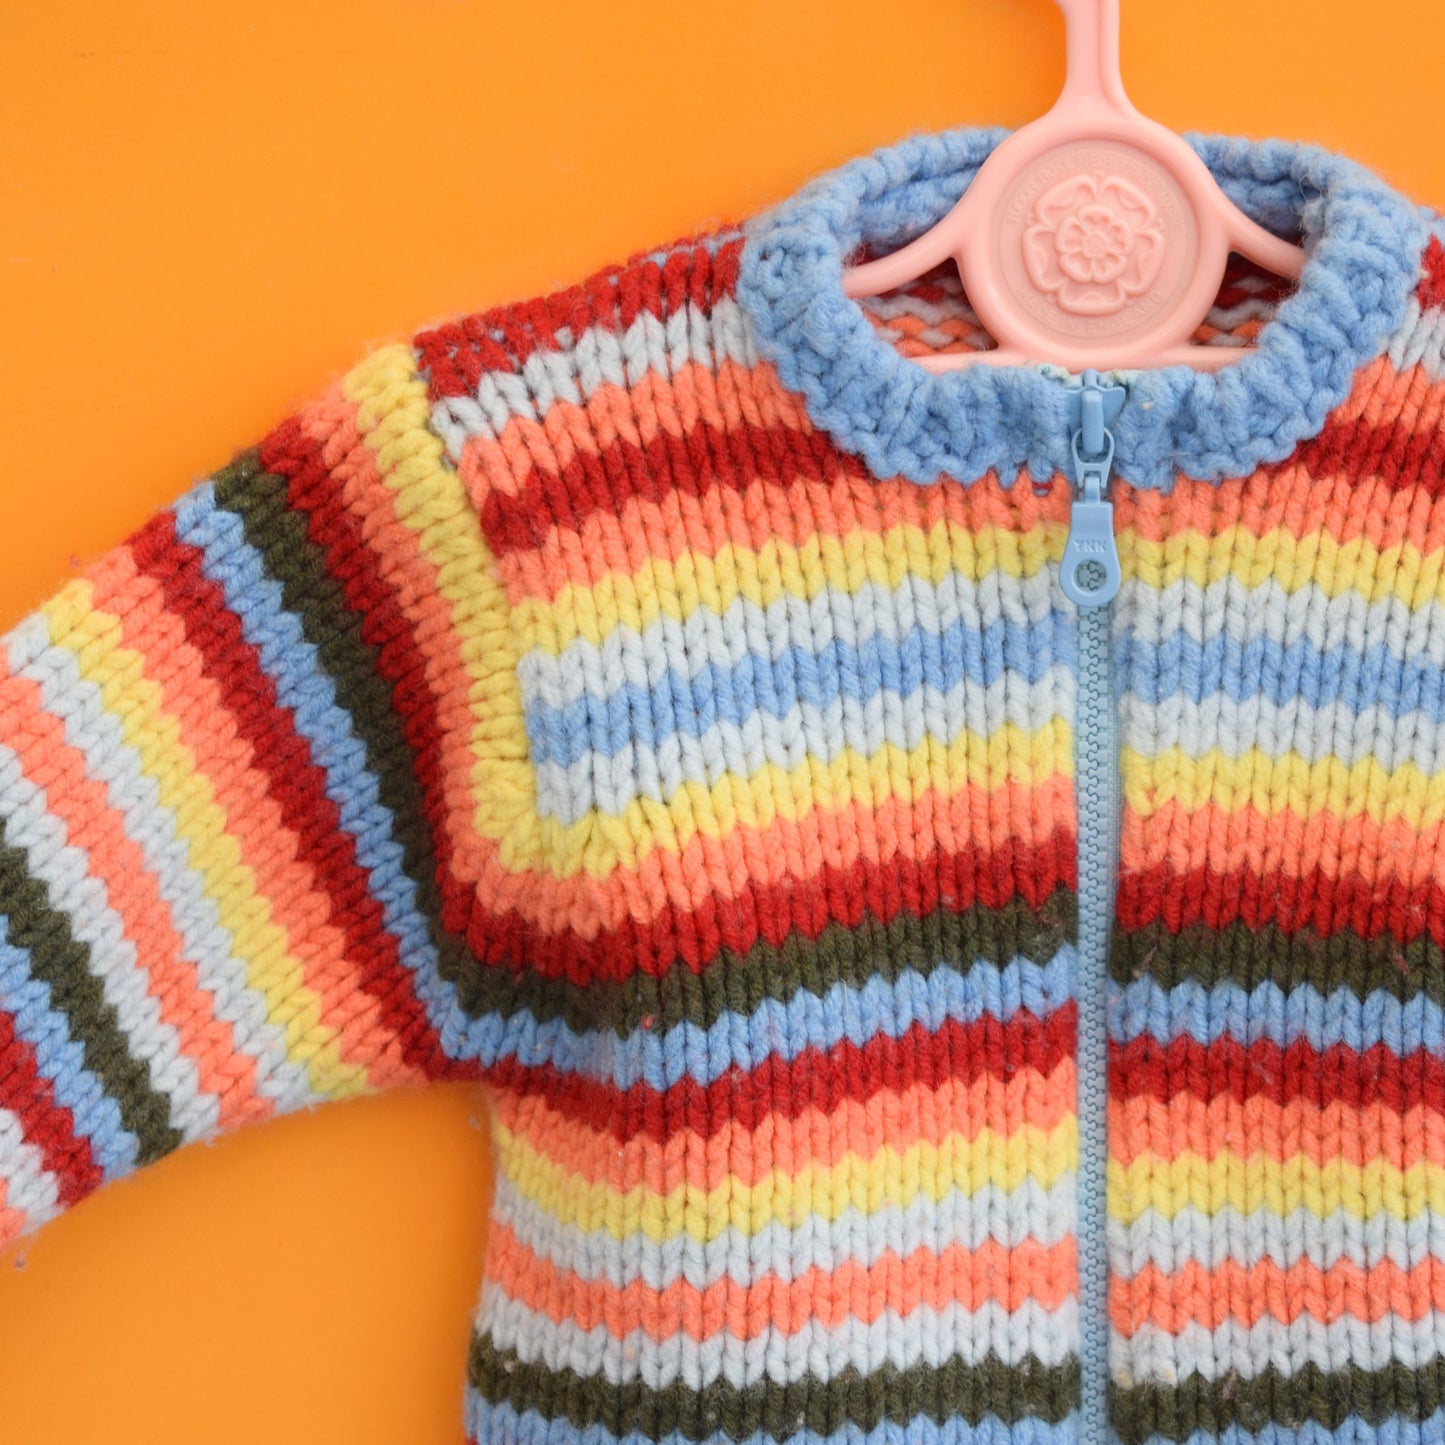 Vintage 1980s Knitted Cardigan - Benetton - 6 Months